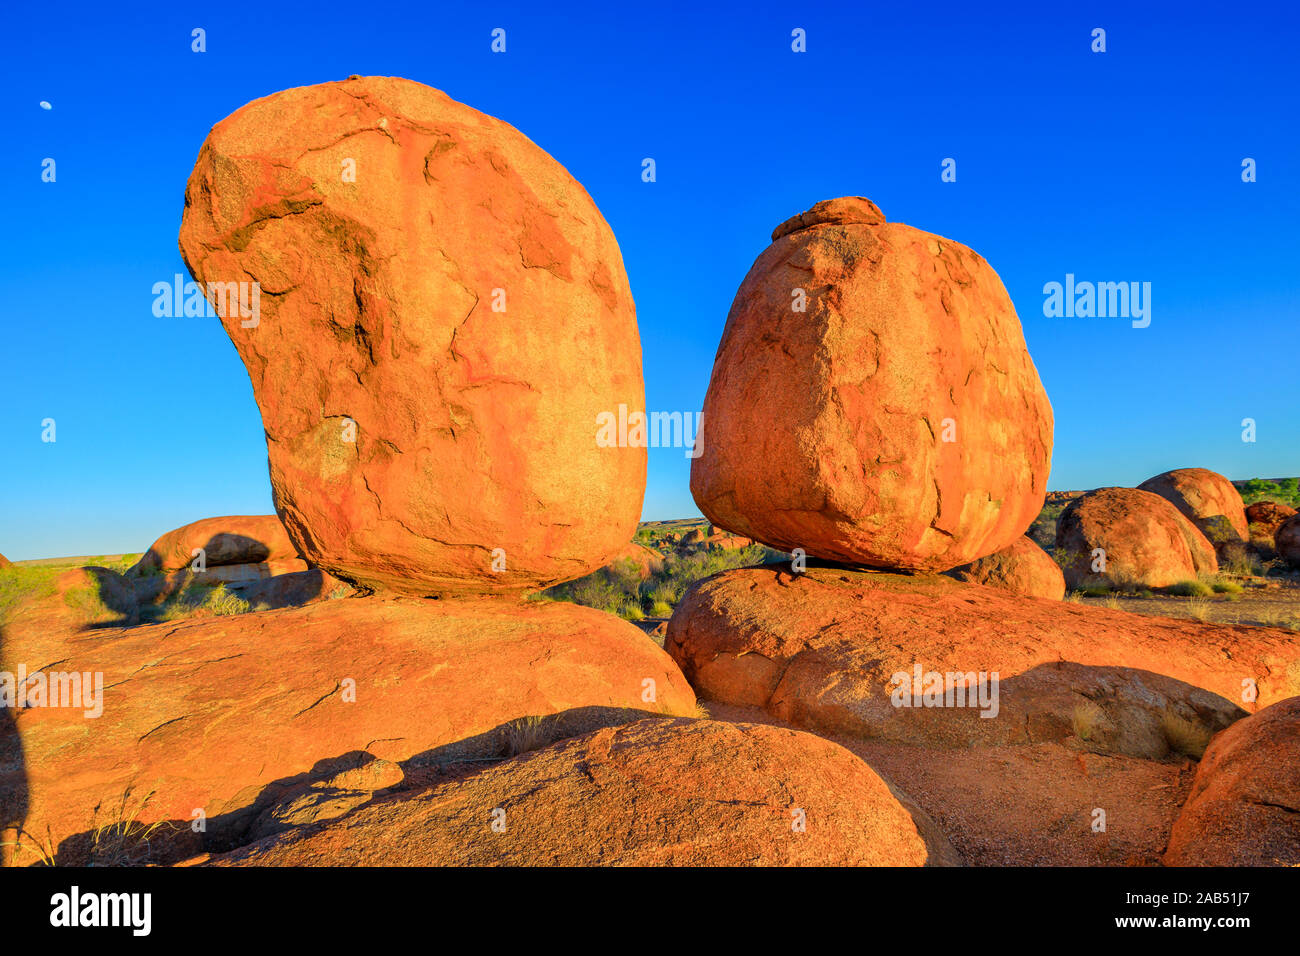 Popular and iconic Devils Marbles: Eggs of mythical Rainbow Serpent at sunset. Karlu Karlu - Devils Marbles is one of Australia's most famous natural Stock Photo